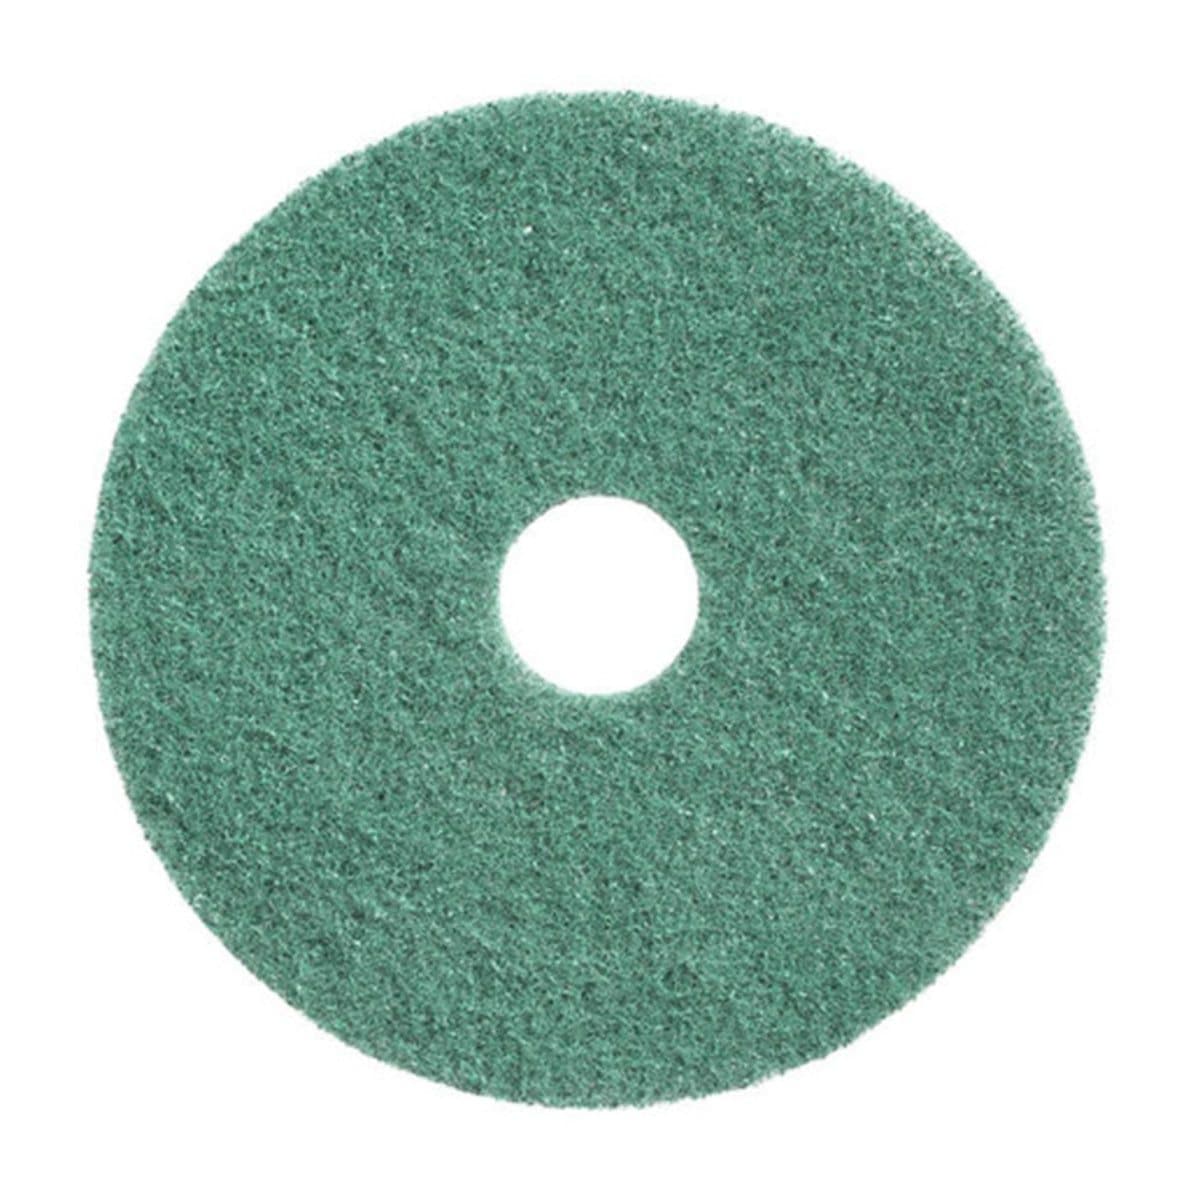 HTC Twister Pads - Green - Twister Cleaning Technology